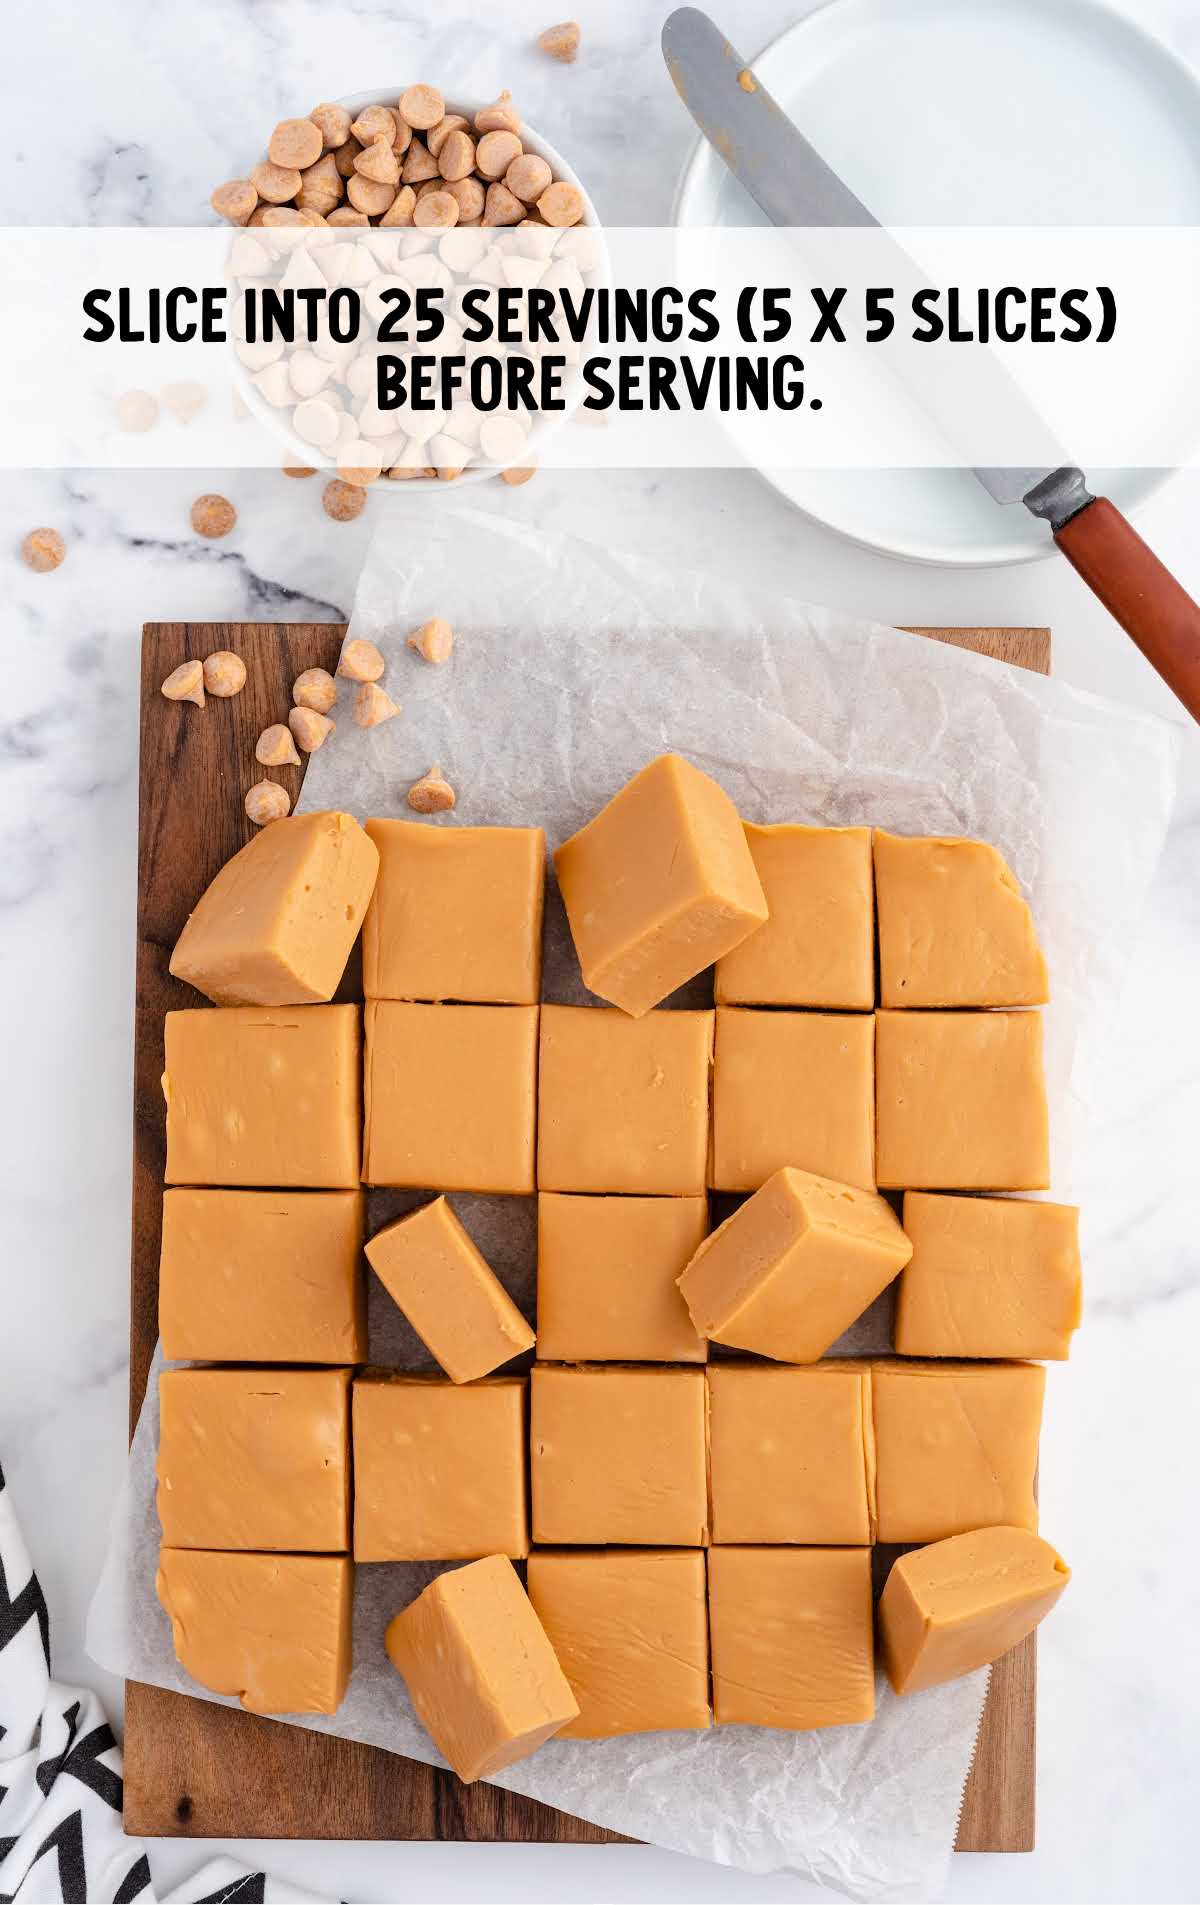 using a knife slice fudge blocks into 25 serving slices on a wooden board